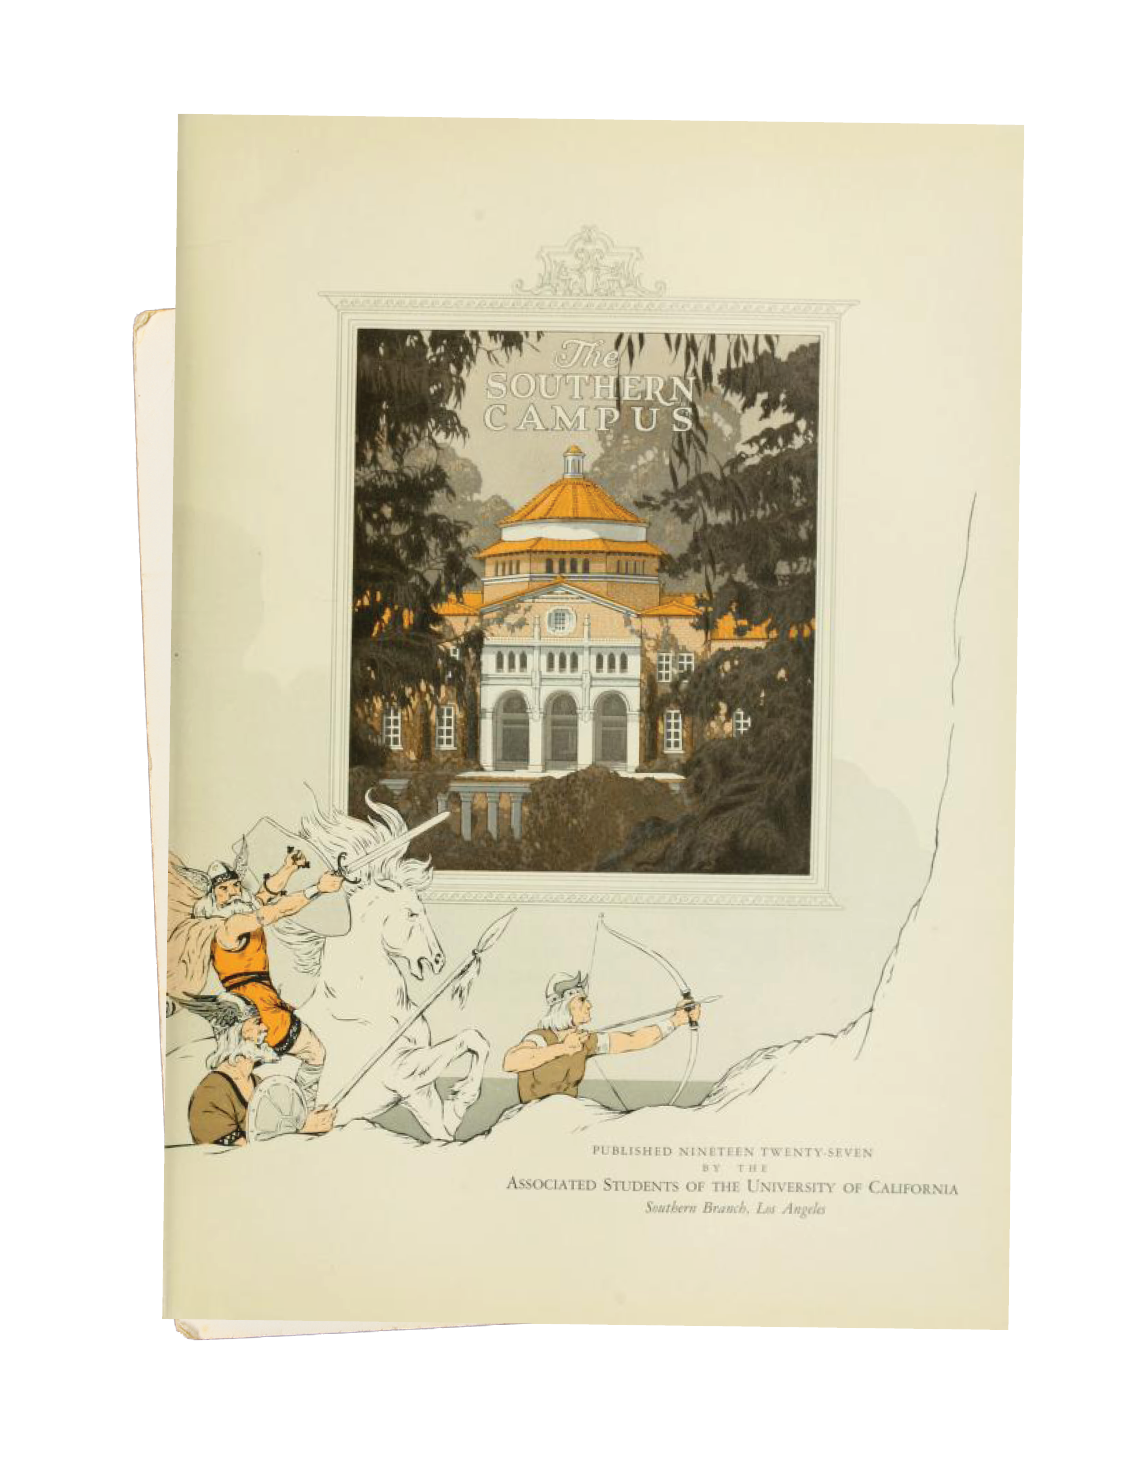 The cover of UCLA's (then called The Southern Campus) 1927 yearbook, depicting Viking warriors and a building surrounded by trees.